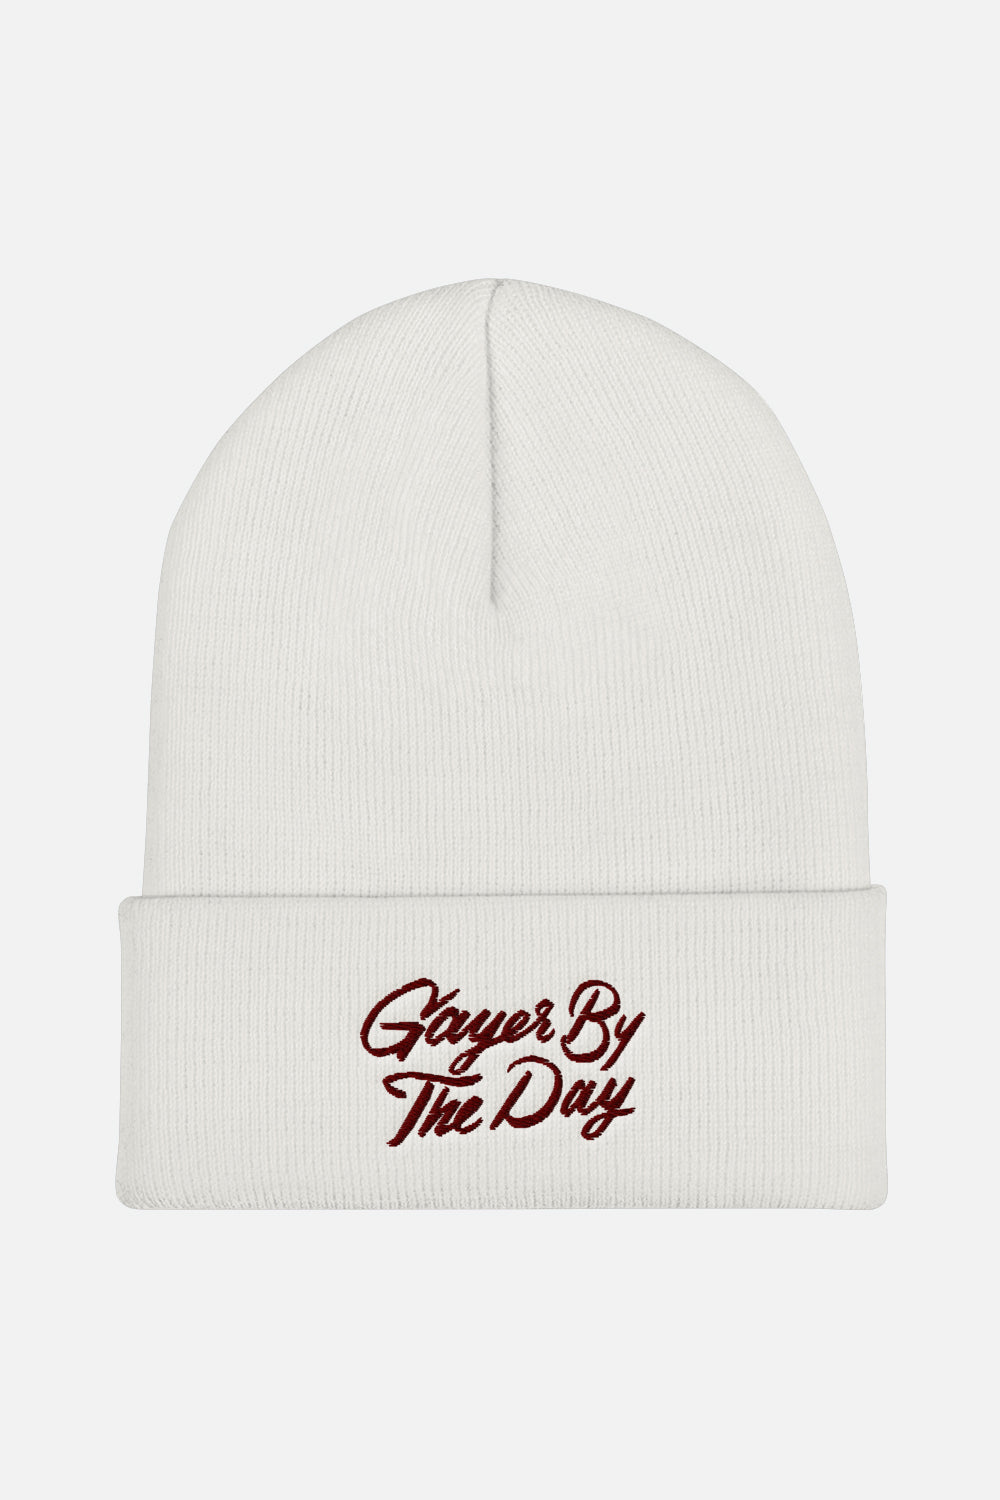 Gayer by the Day Cuffed Beanie | V.E. Schwab Official Collection